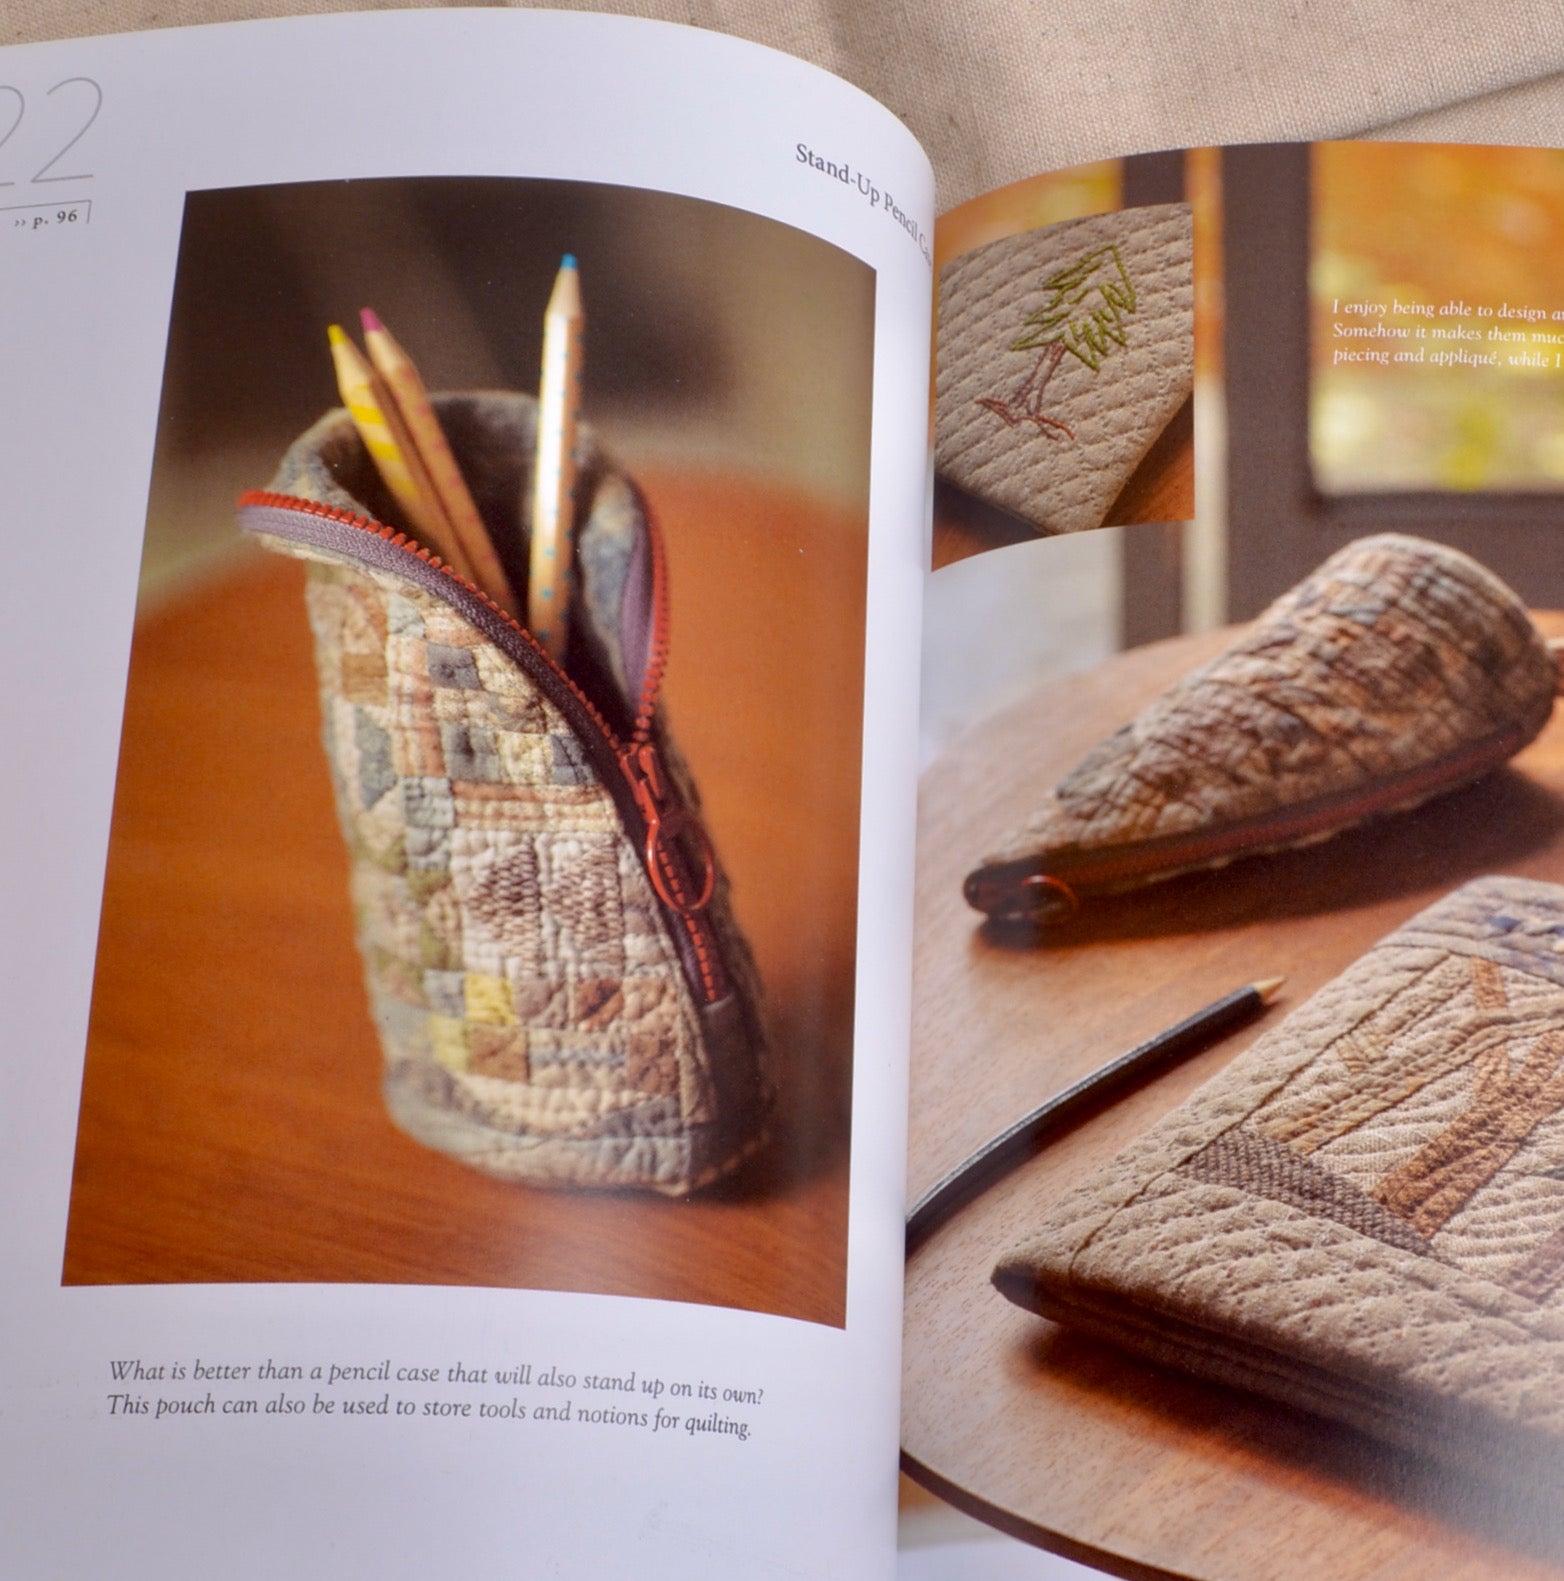 Beautiful Bags, Pouches and Quilts  Book